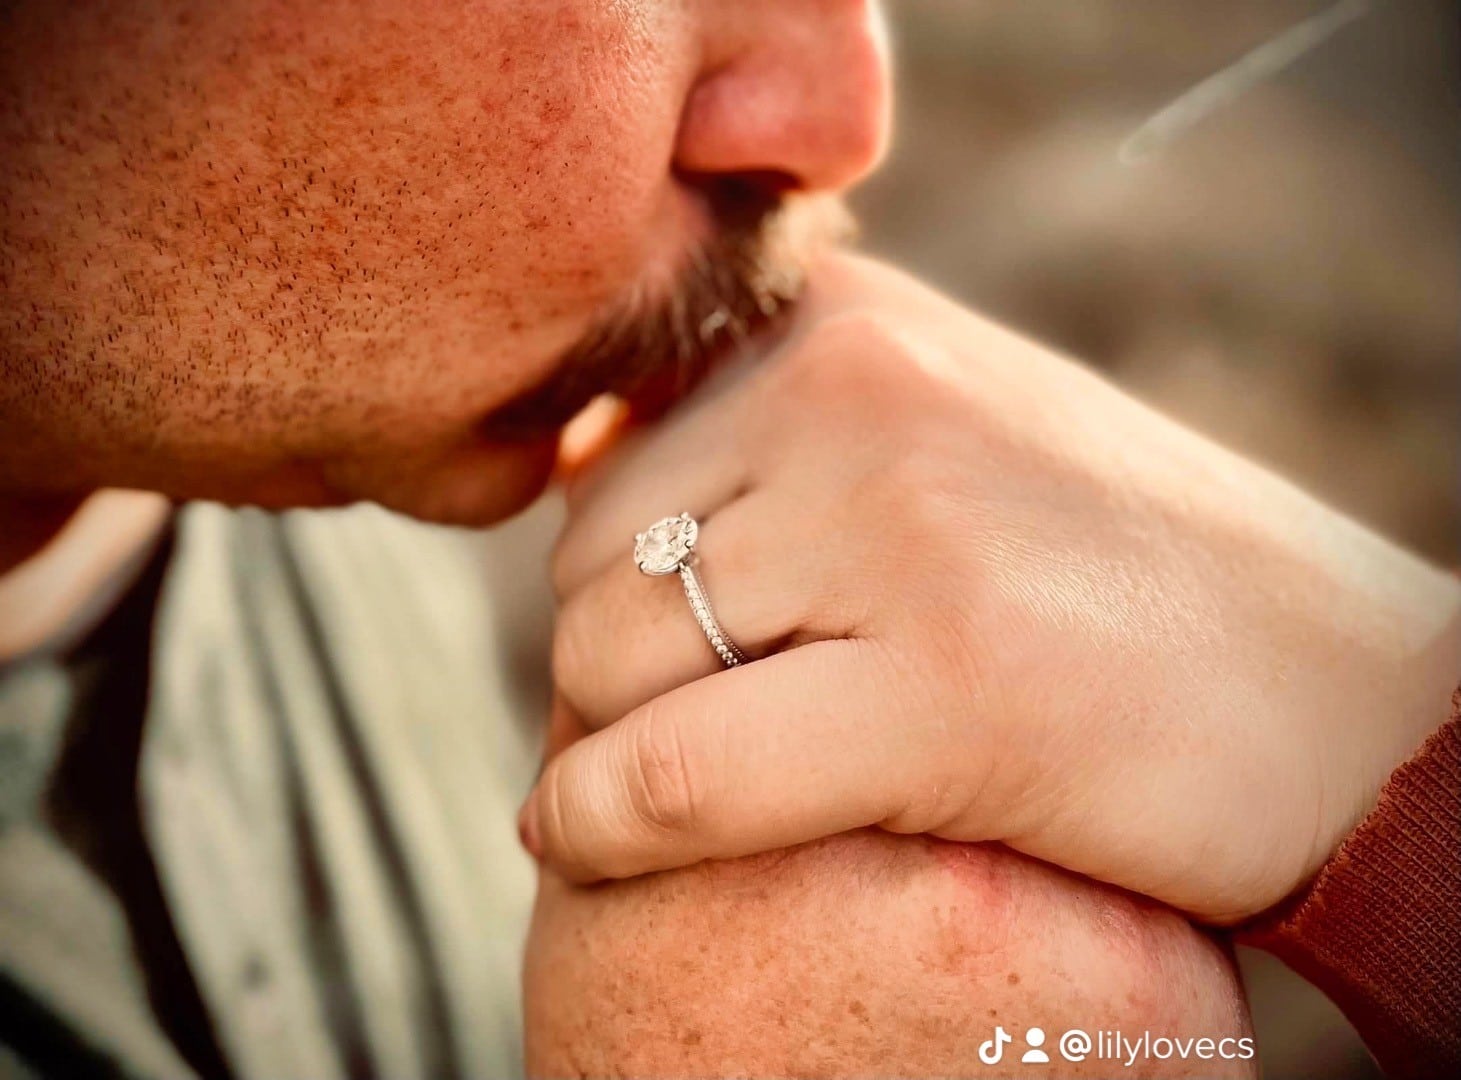 man holds womans hand with engagement ring on it while kissing it